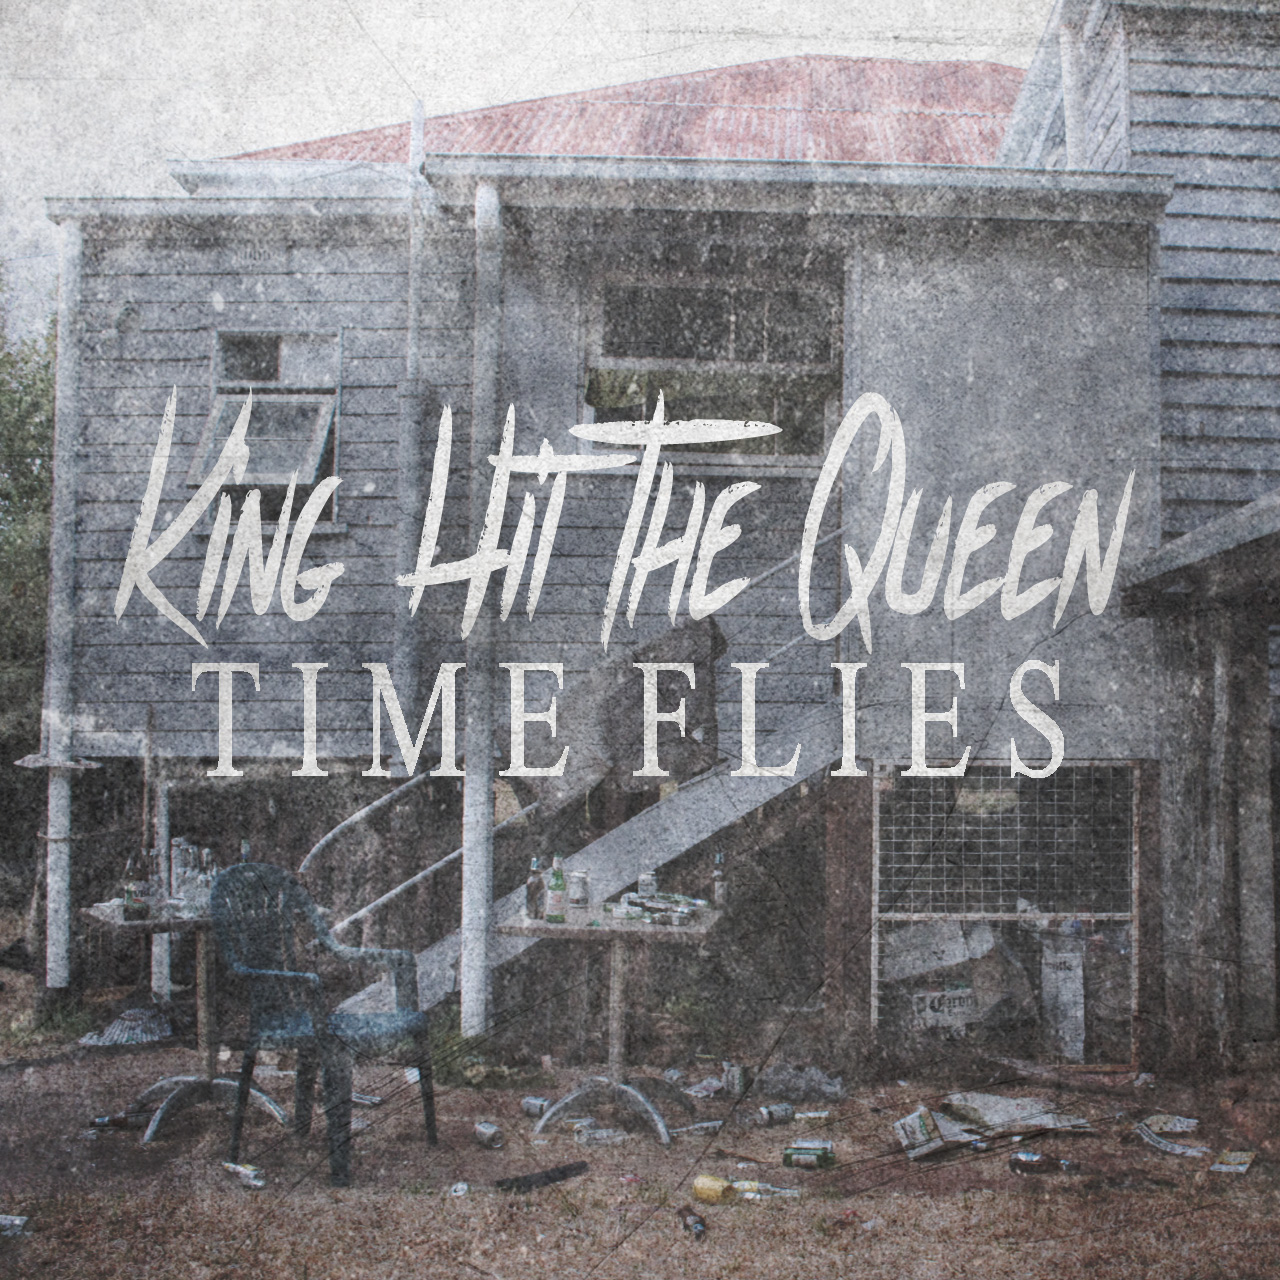 King Hit The Queen - Time Flies [EP] (2015)